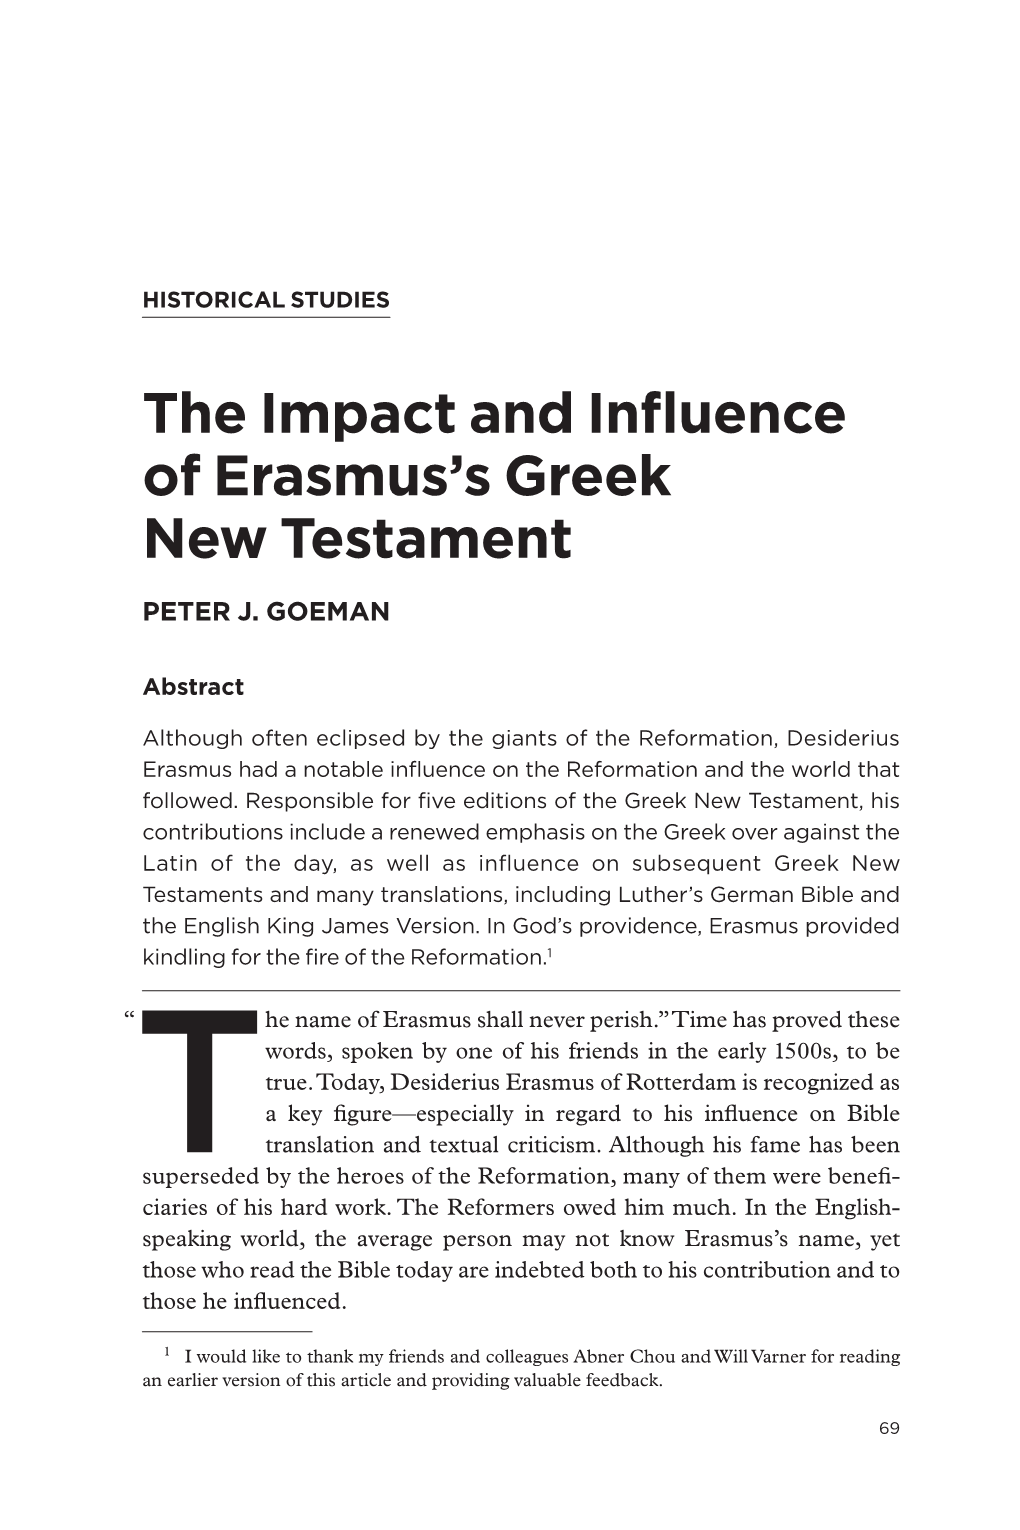 The Impact and Influence of Erasmus's Greek New Testament